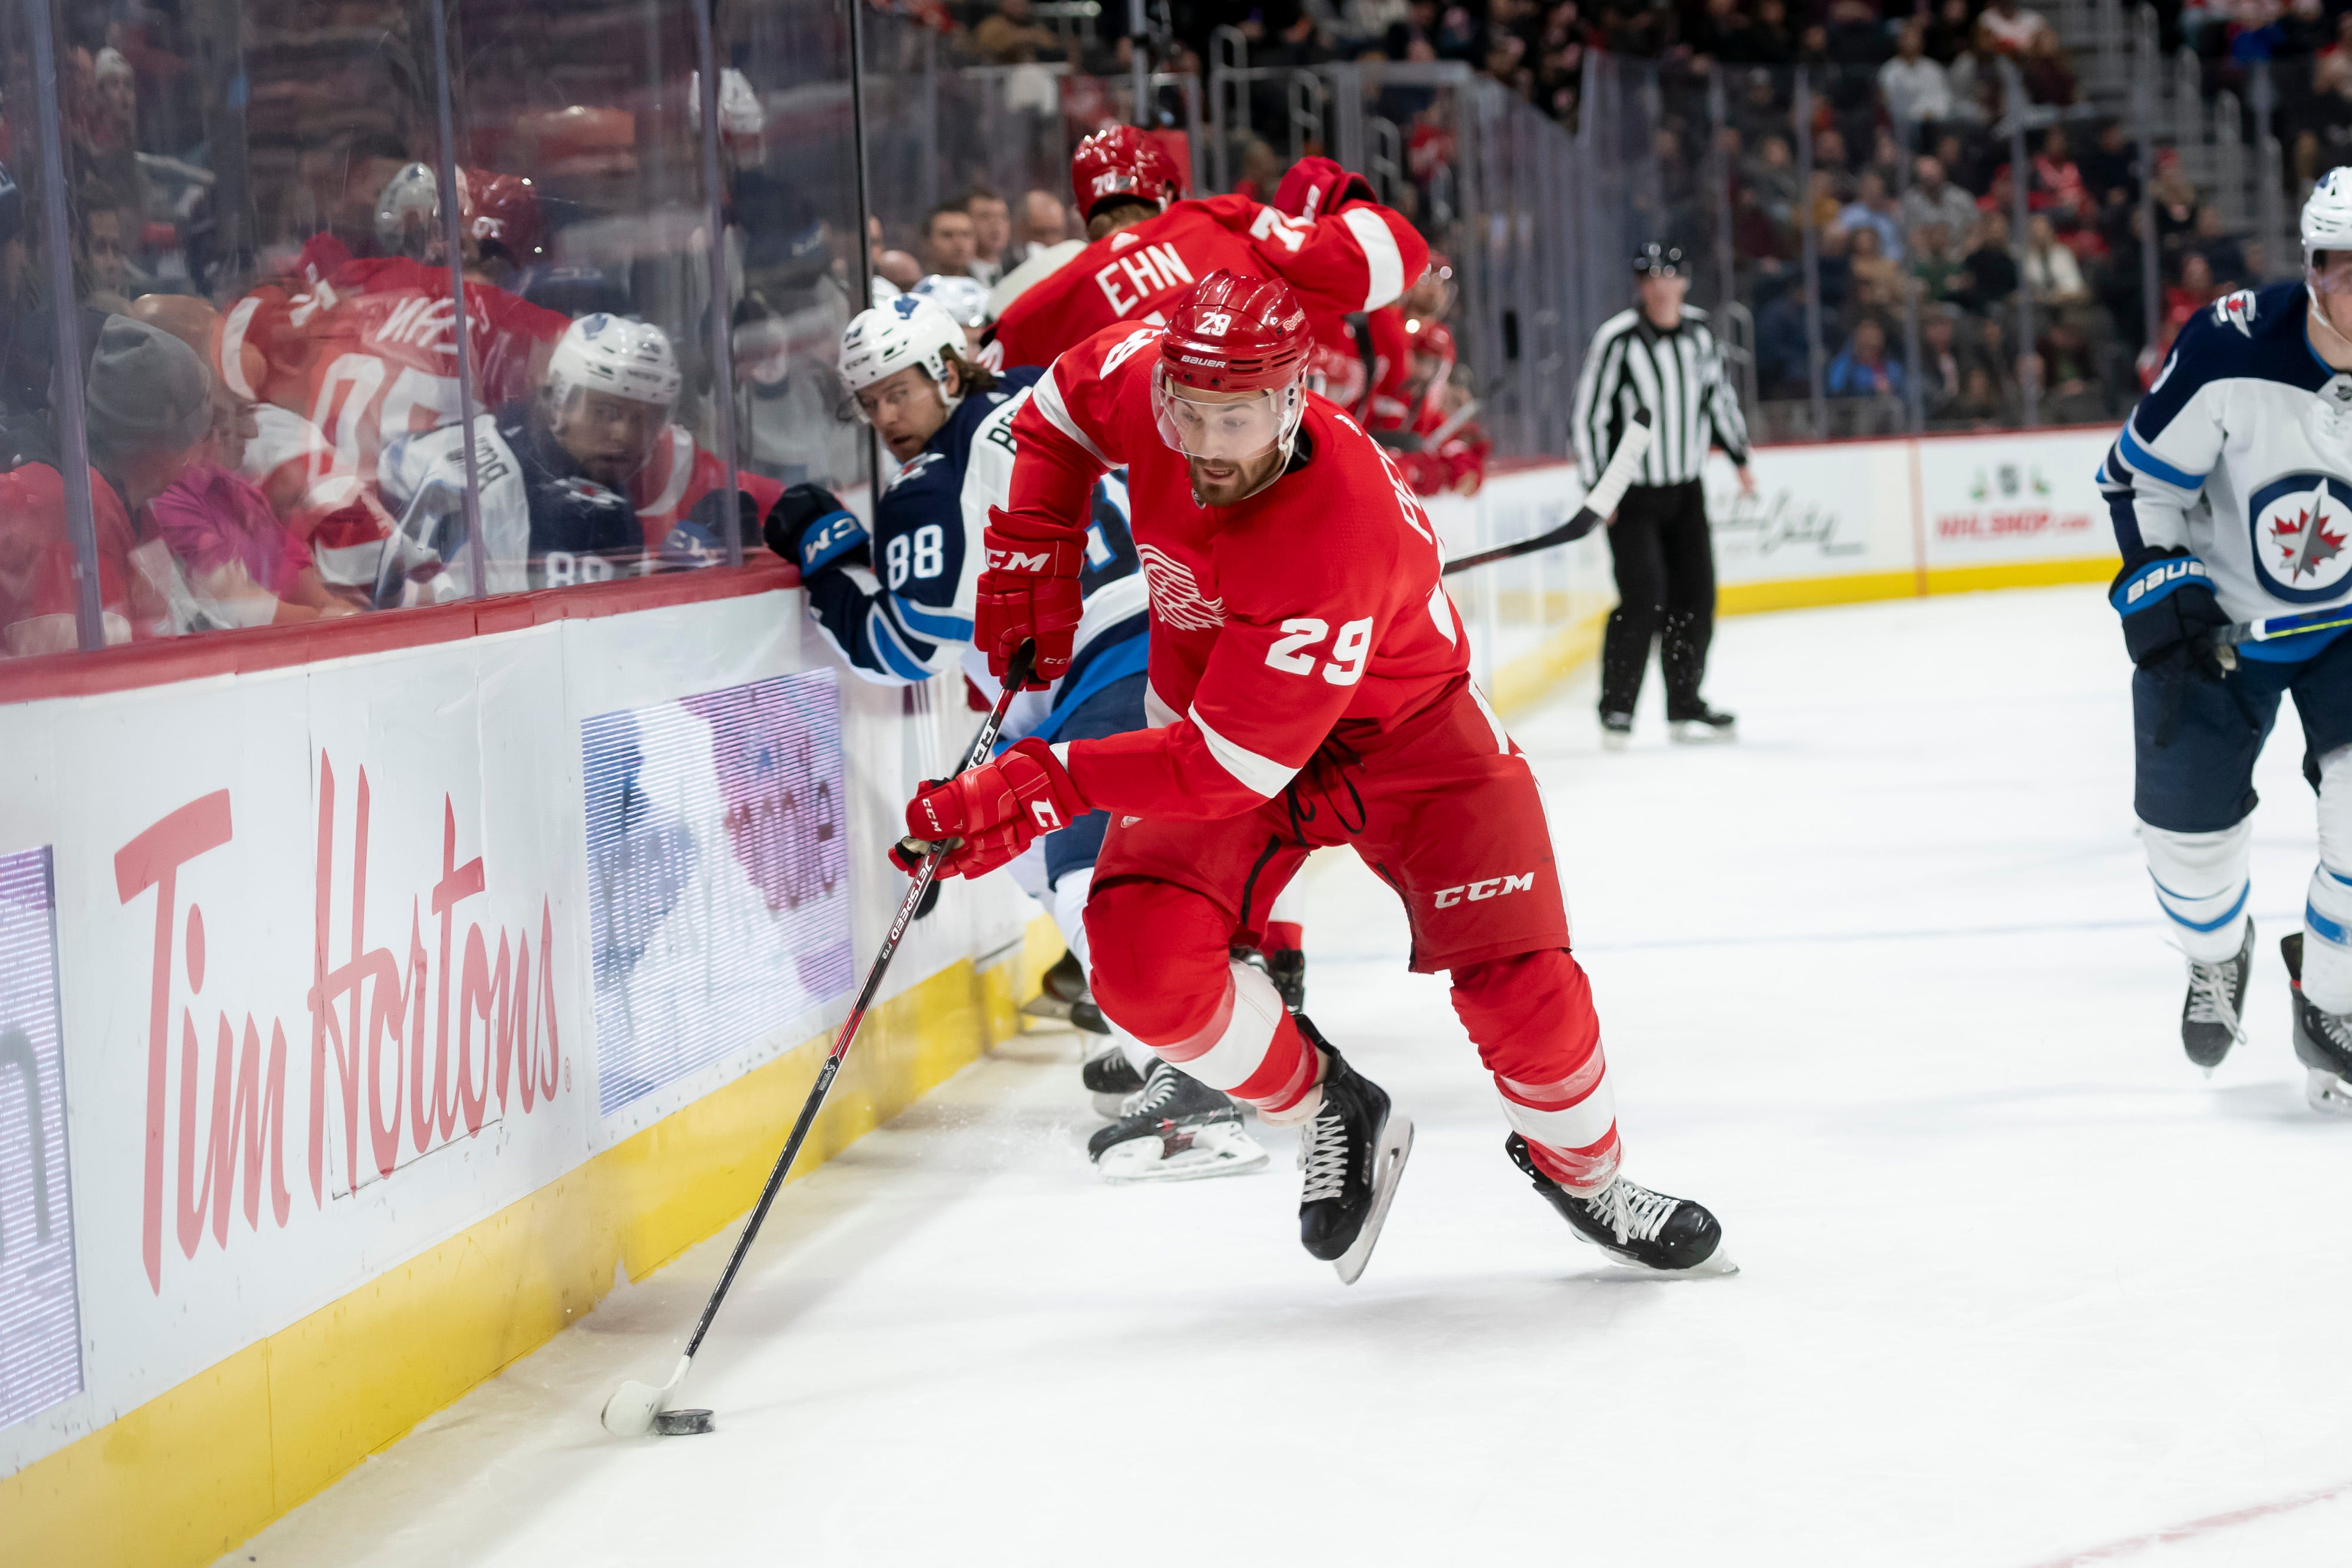 26. Brendan Perlini, left wing: Acquired early in the season after scoring at least 14 goals three seasons in the NHL, Perlini has struggled with the Wings (one goal in 39 games). A restricted free agent, Perlini’s Wings’ future is uncertain.